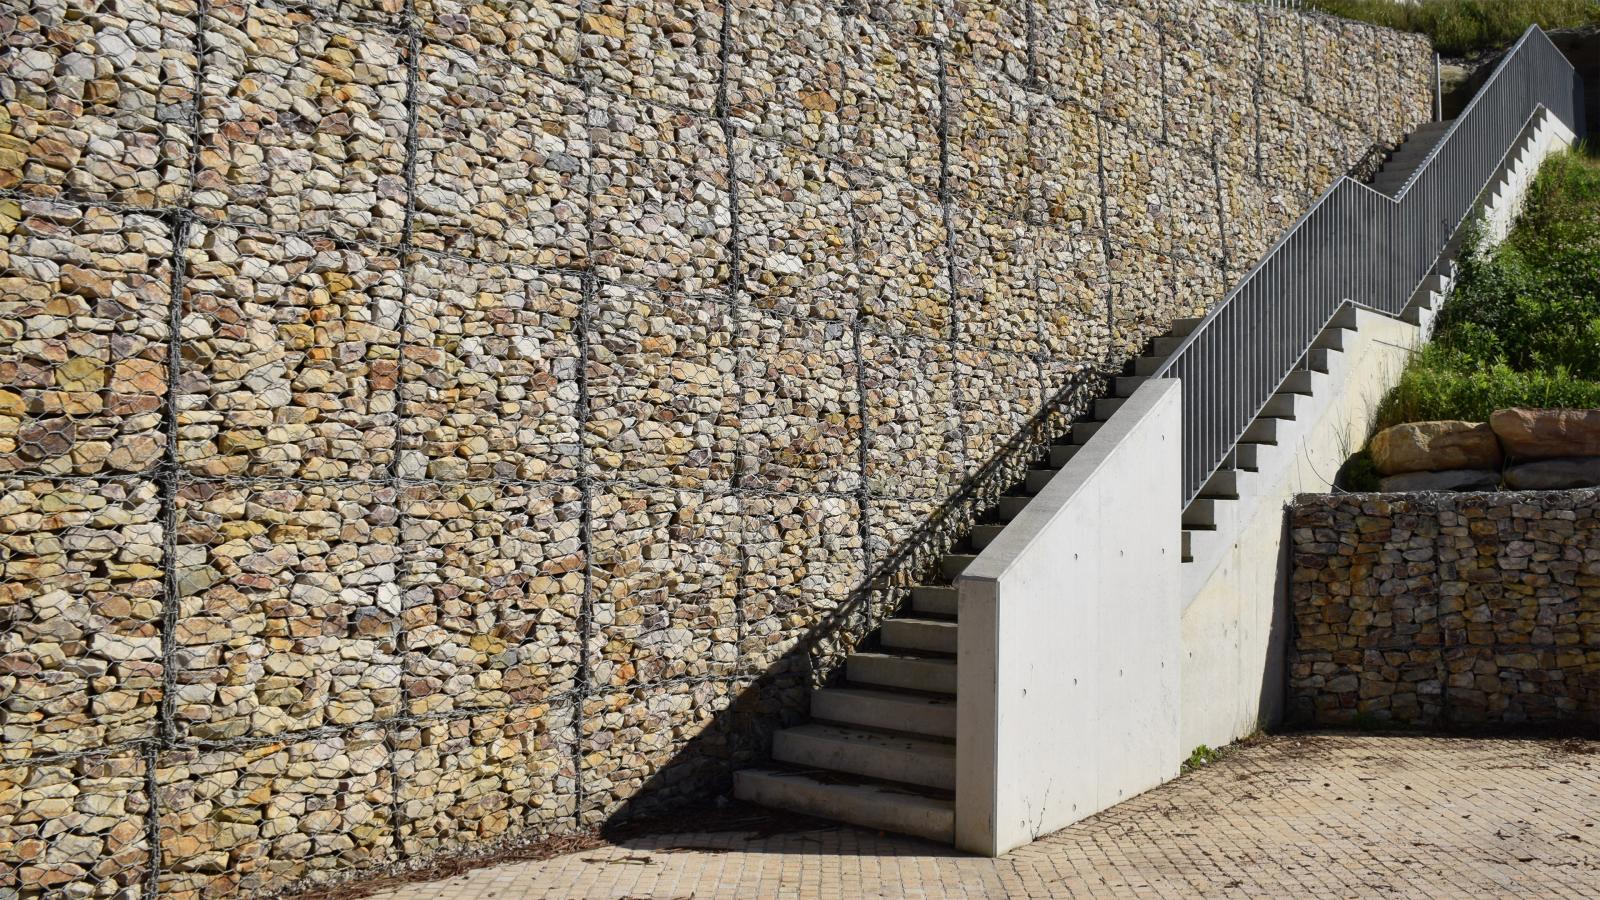 A concrete staircase with gray railings is built against a large stone retaining wall made of rocks enclosed in wire cages. The steps lead up to a higher level with greenery visible on the right side, reminiscent of Manly’s Spring Cove. The ground is paved with tiles.